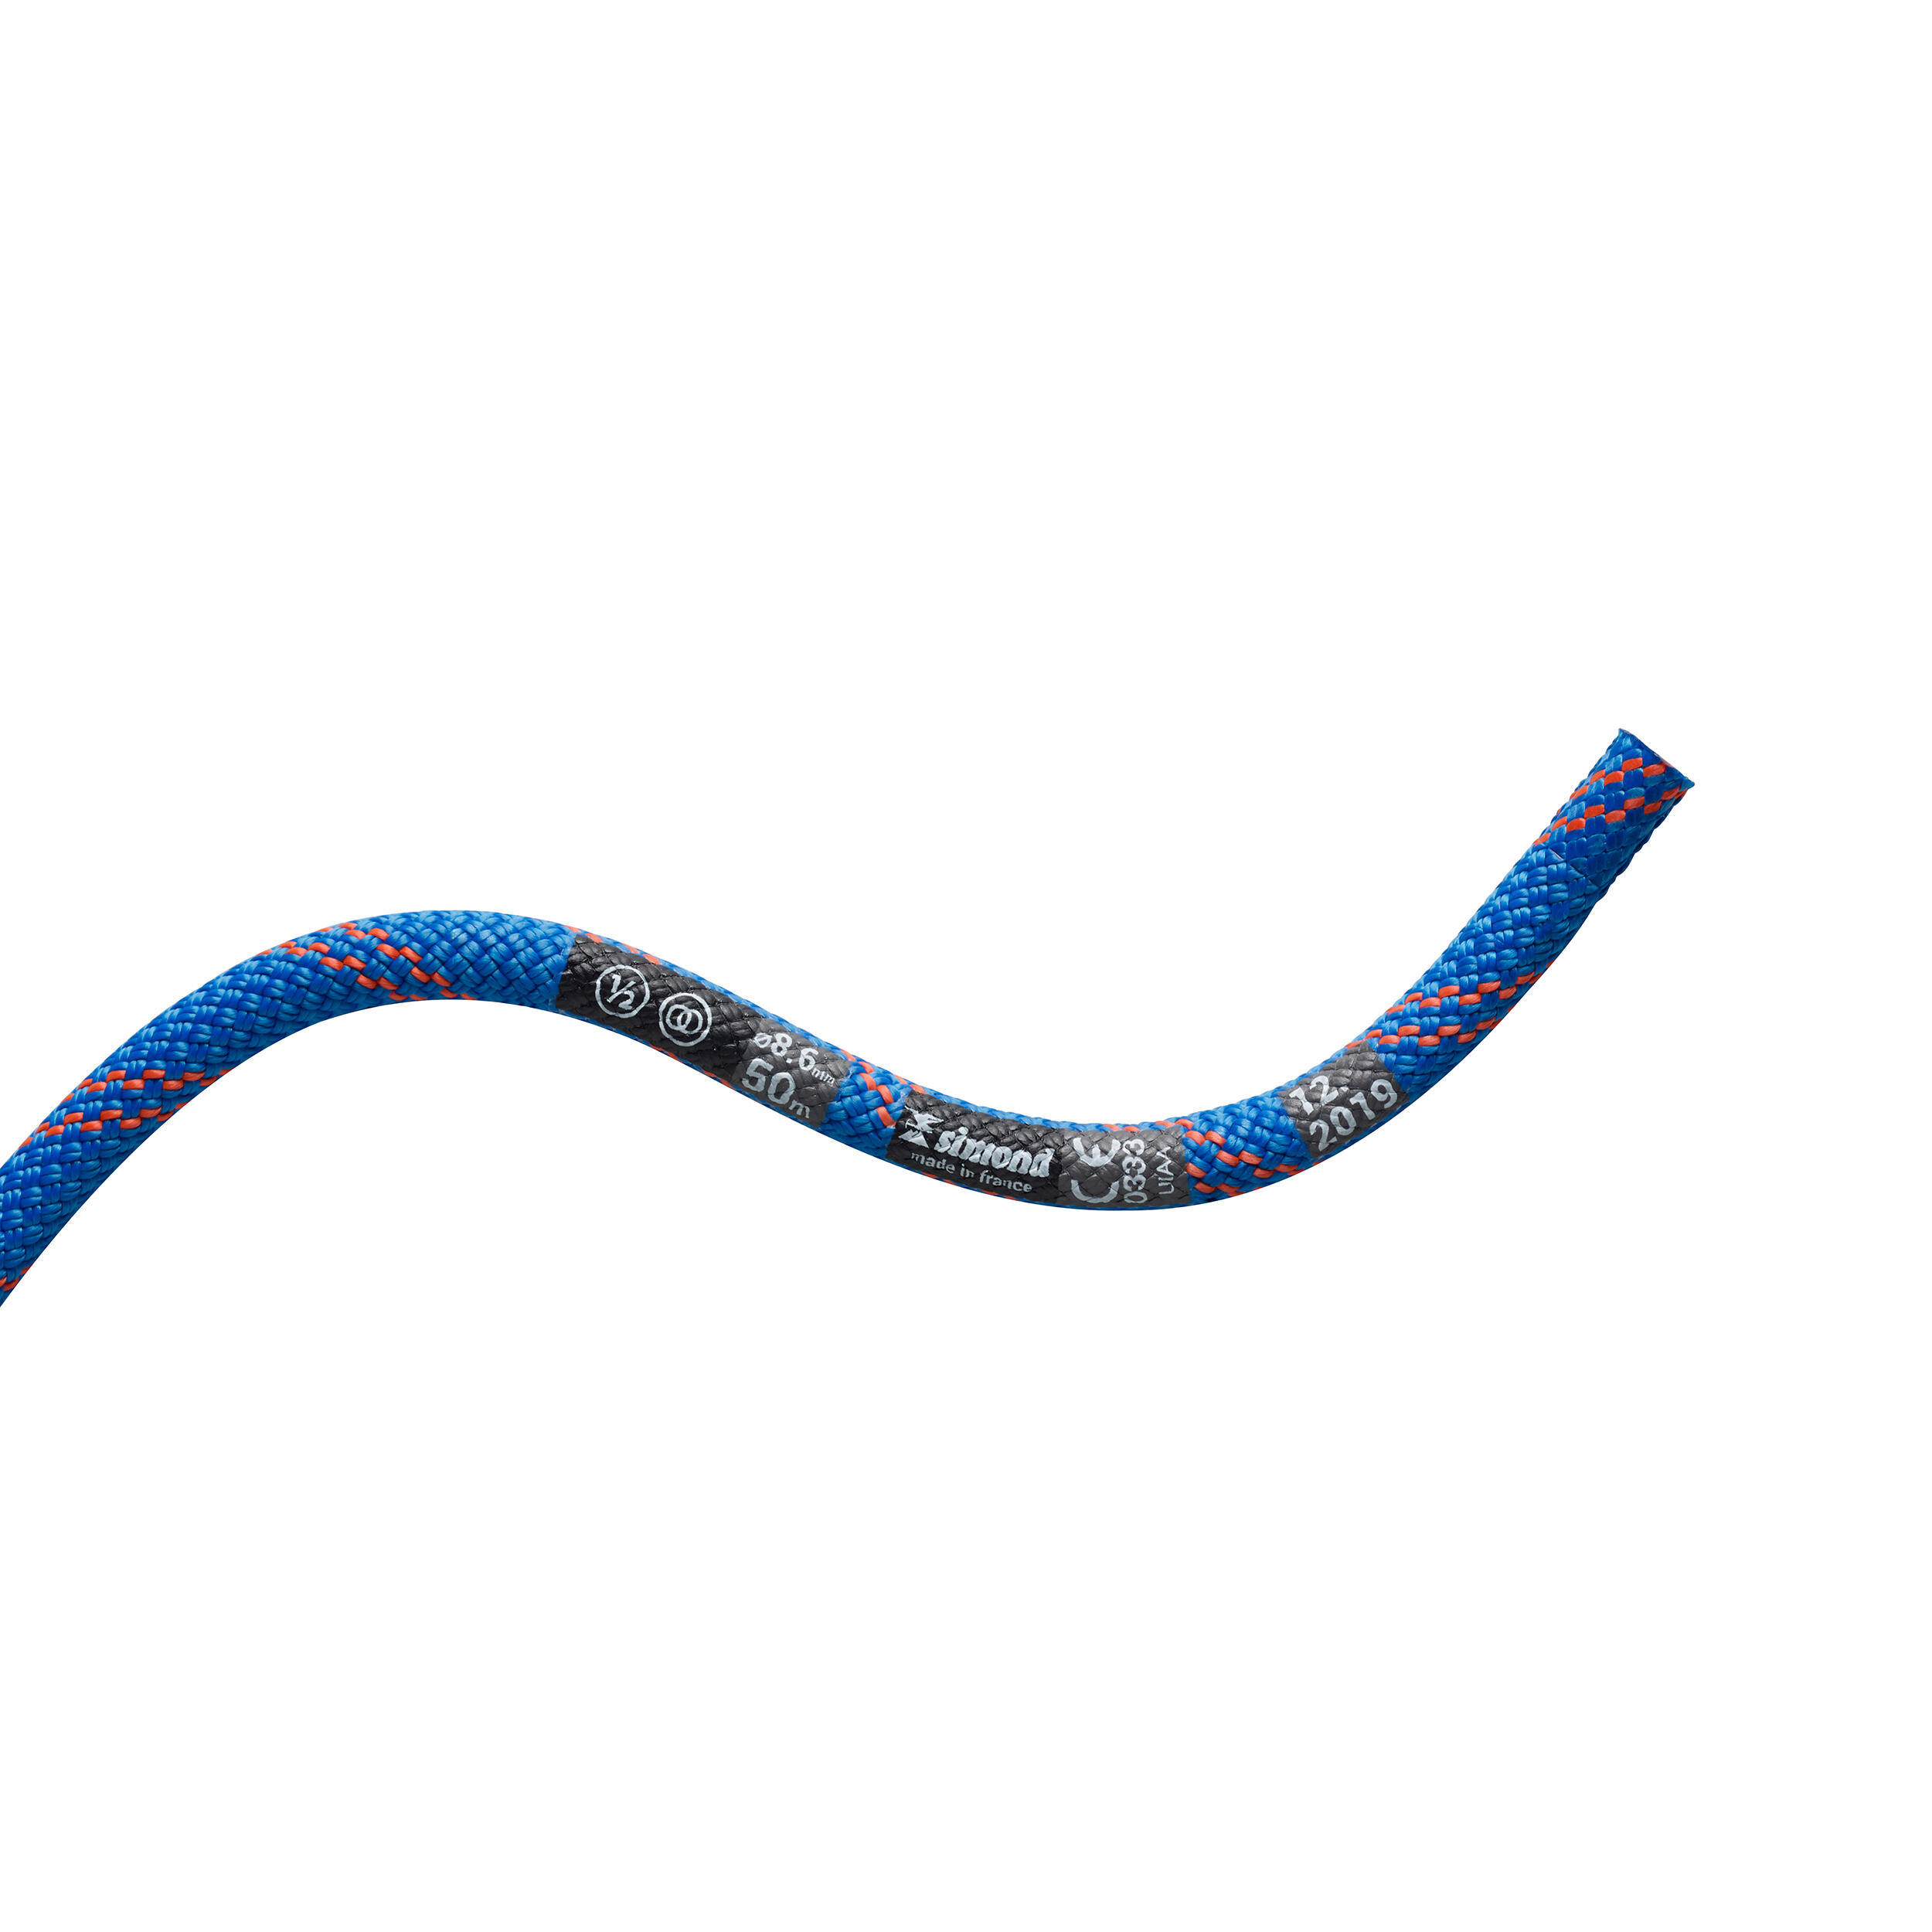 Climbing and mountaineering half rope 8.6 mm x 50 m - RAPPEL 8.6 Blue 4/6